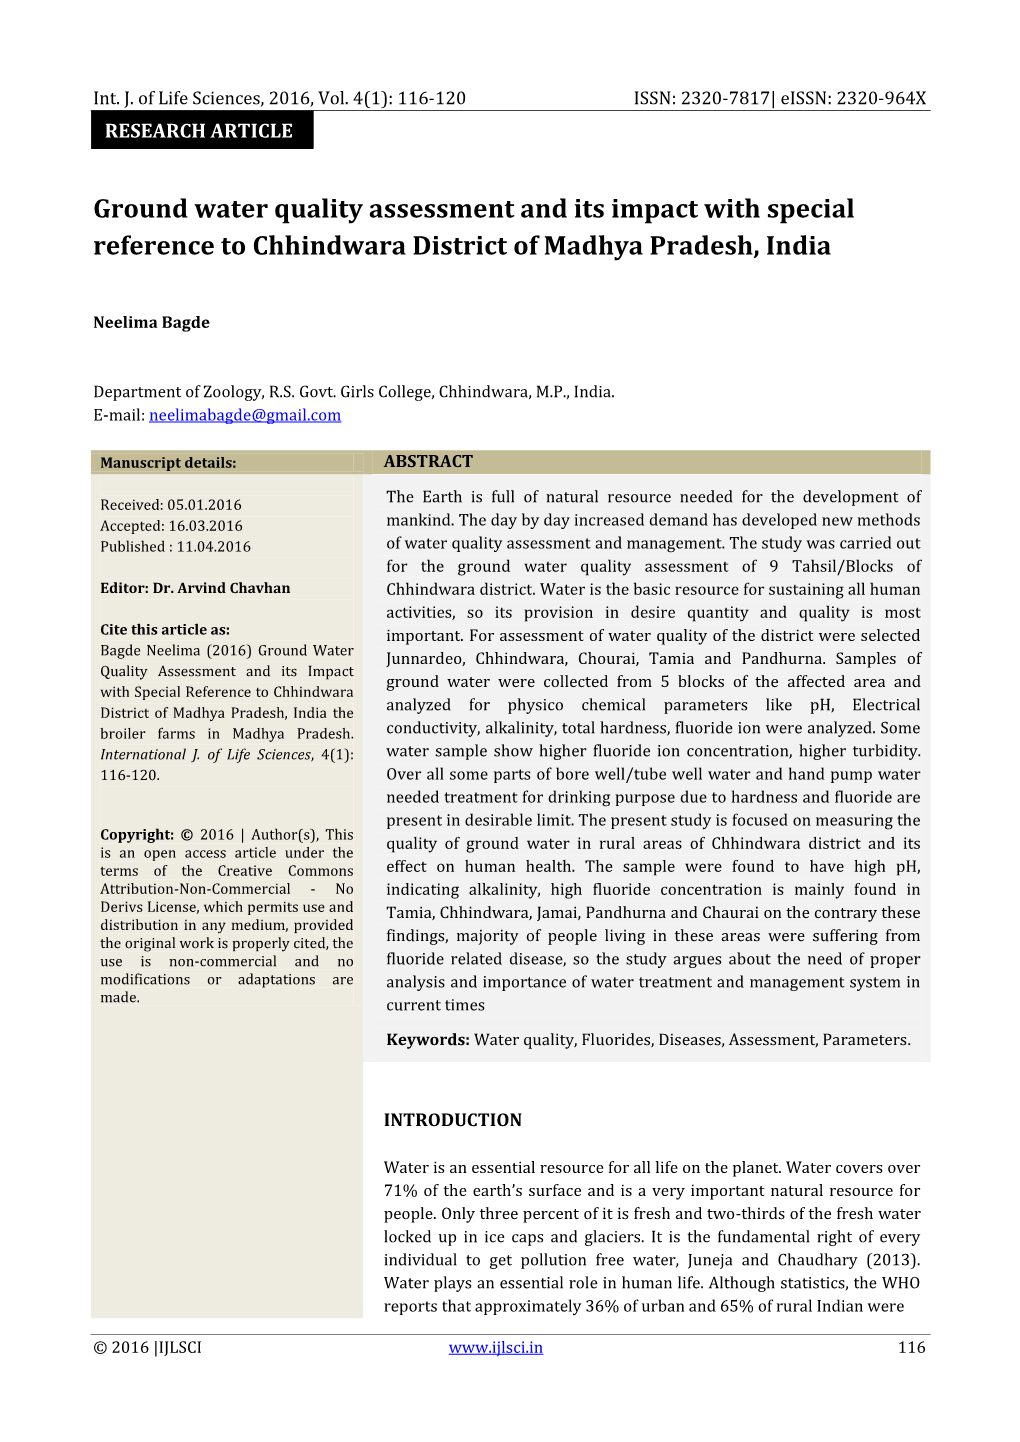 Ground Water Quality Assessment and Its Impact with Special Reference to Chhindwara District of Madhya Pradesh, India